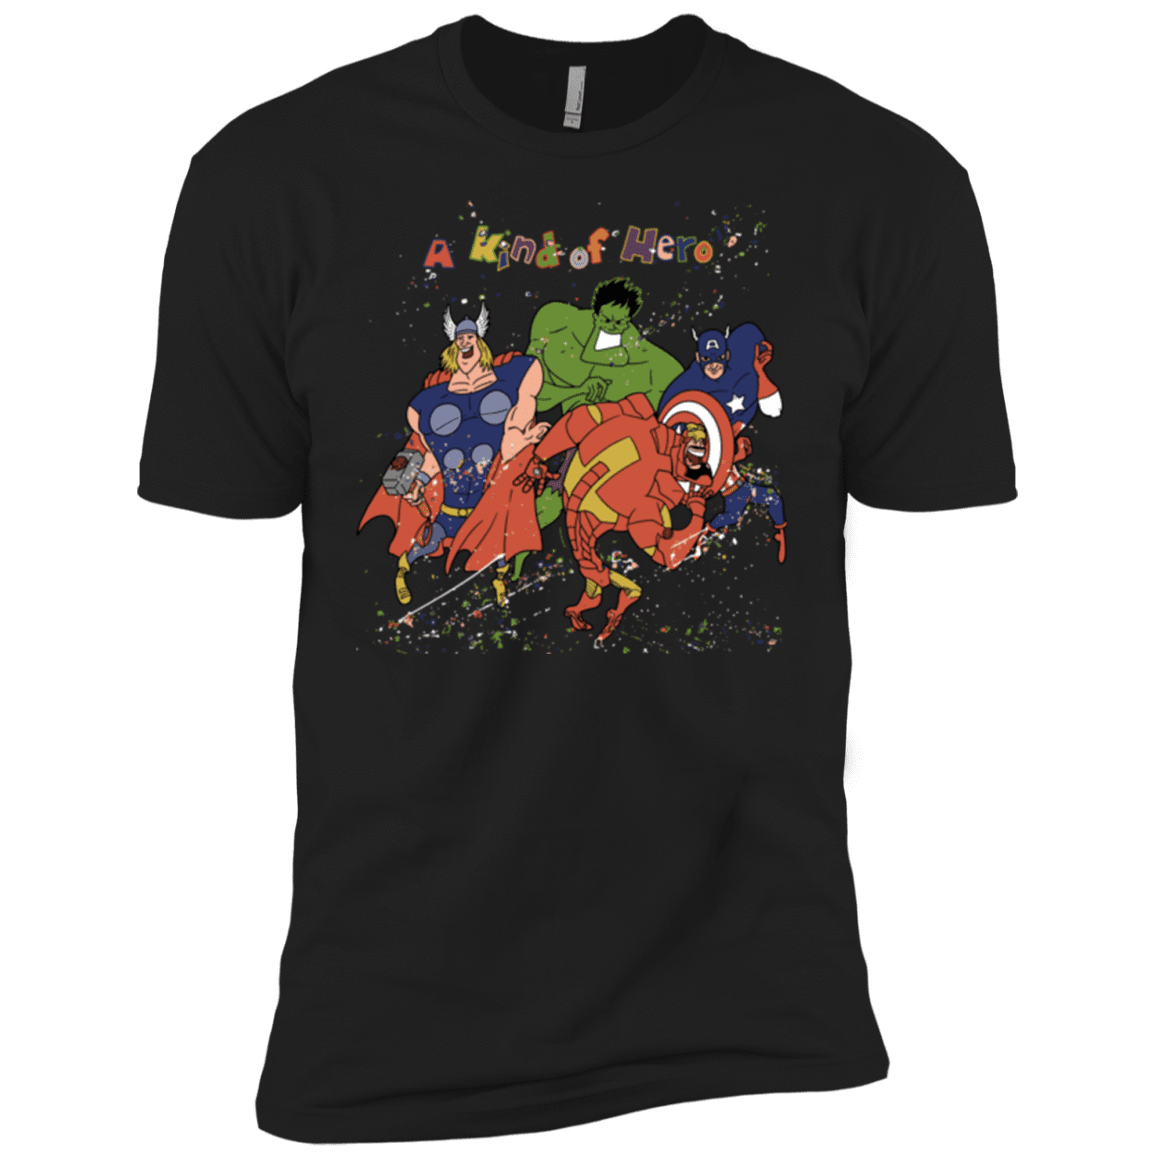 A kind of heroes Boys Premium T-Shirt